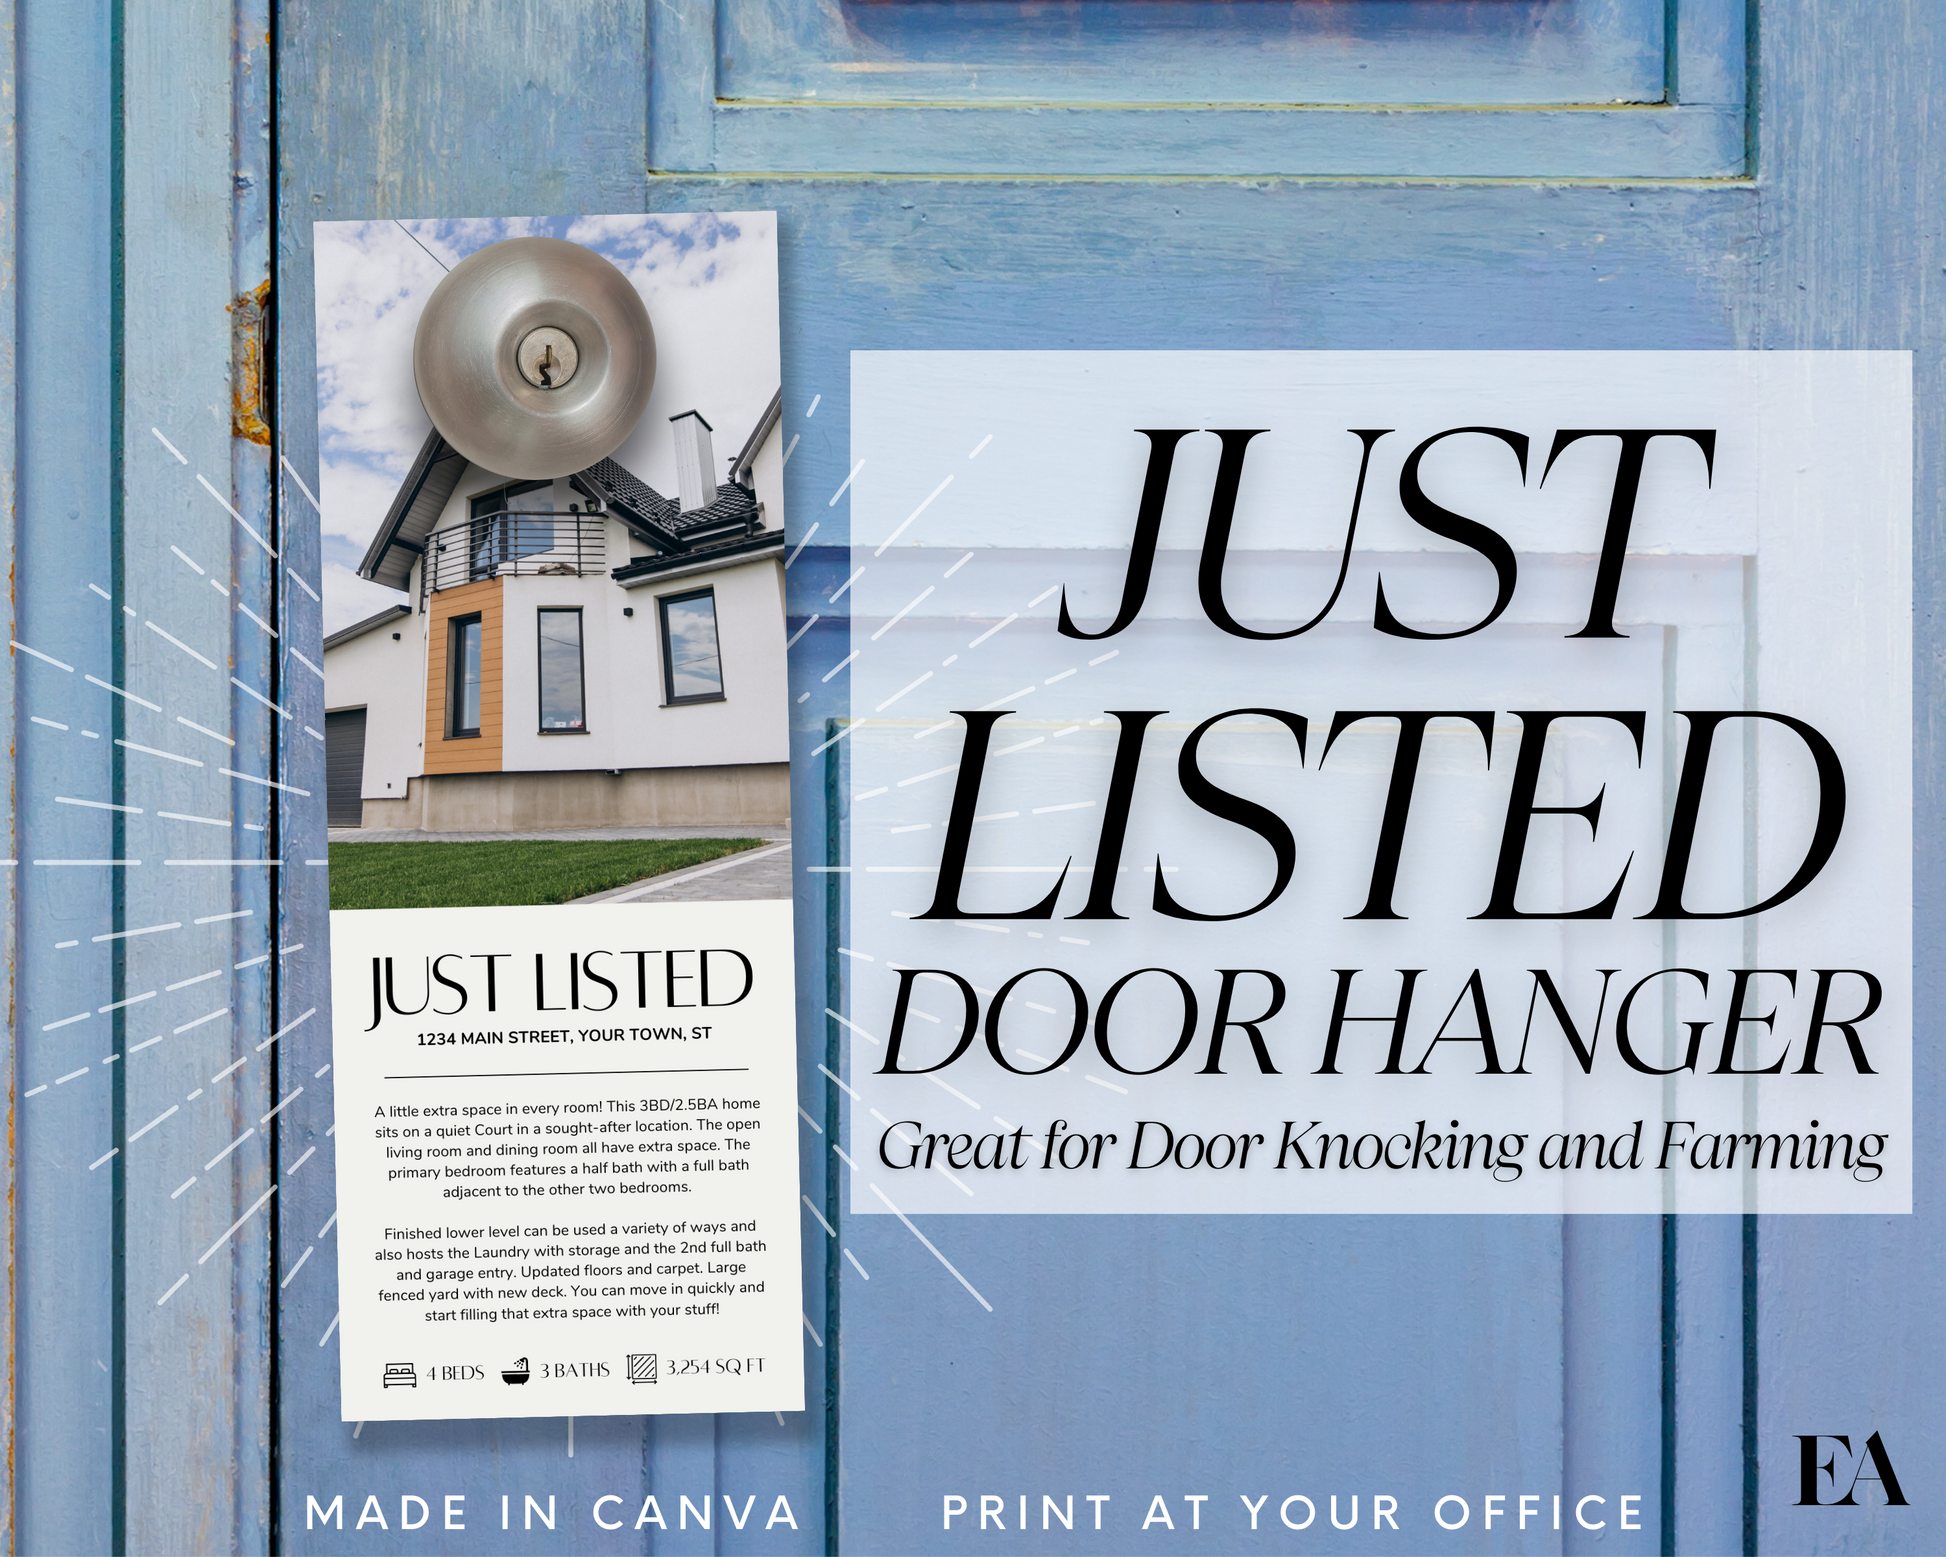 Just Listed Door Hanger Template For Real Estate Just Sold Door Hanger for Realtor Real Estate Farming Flyer Printable Door Tag Real Estate